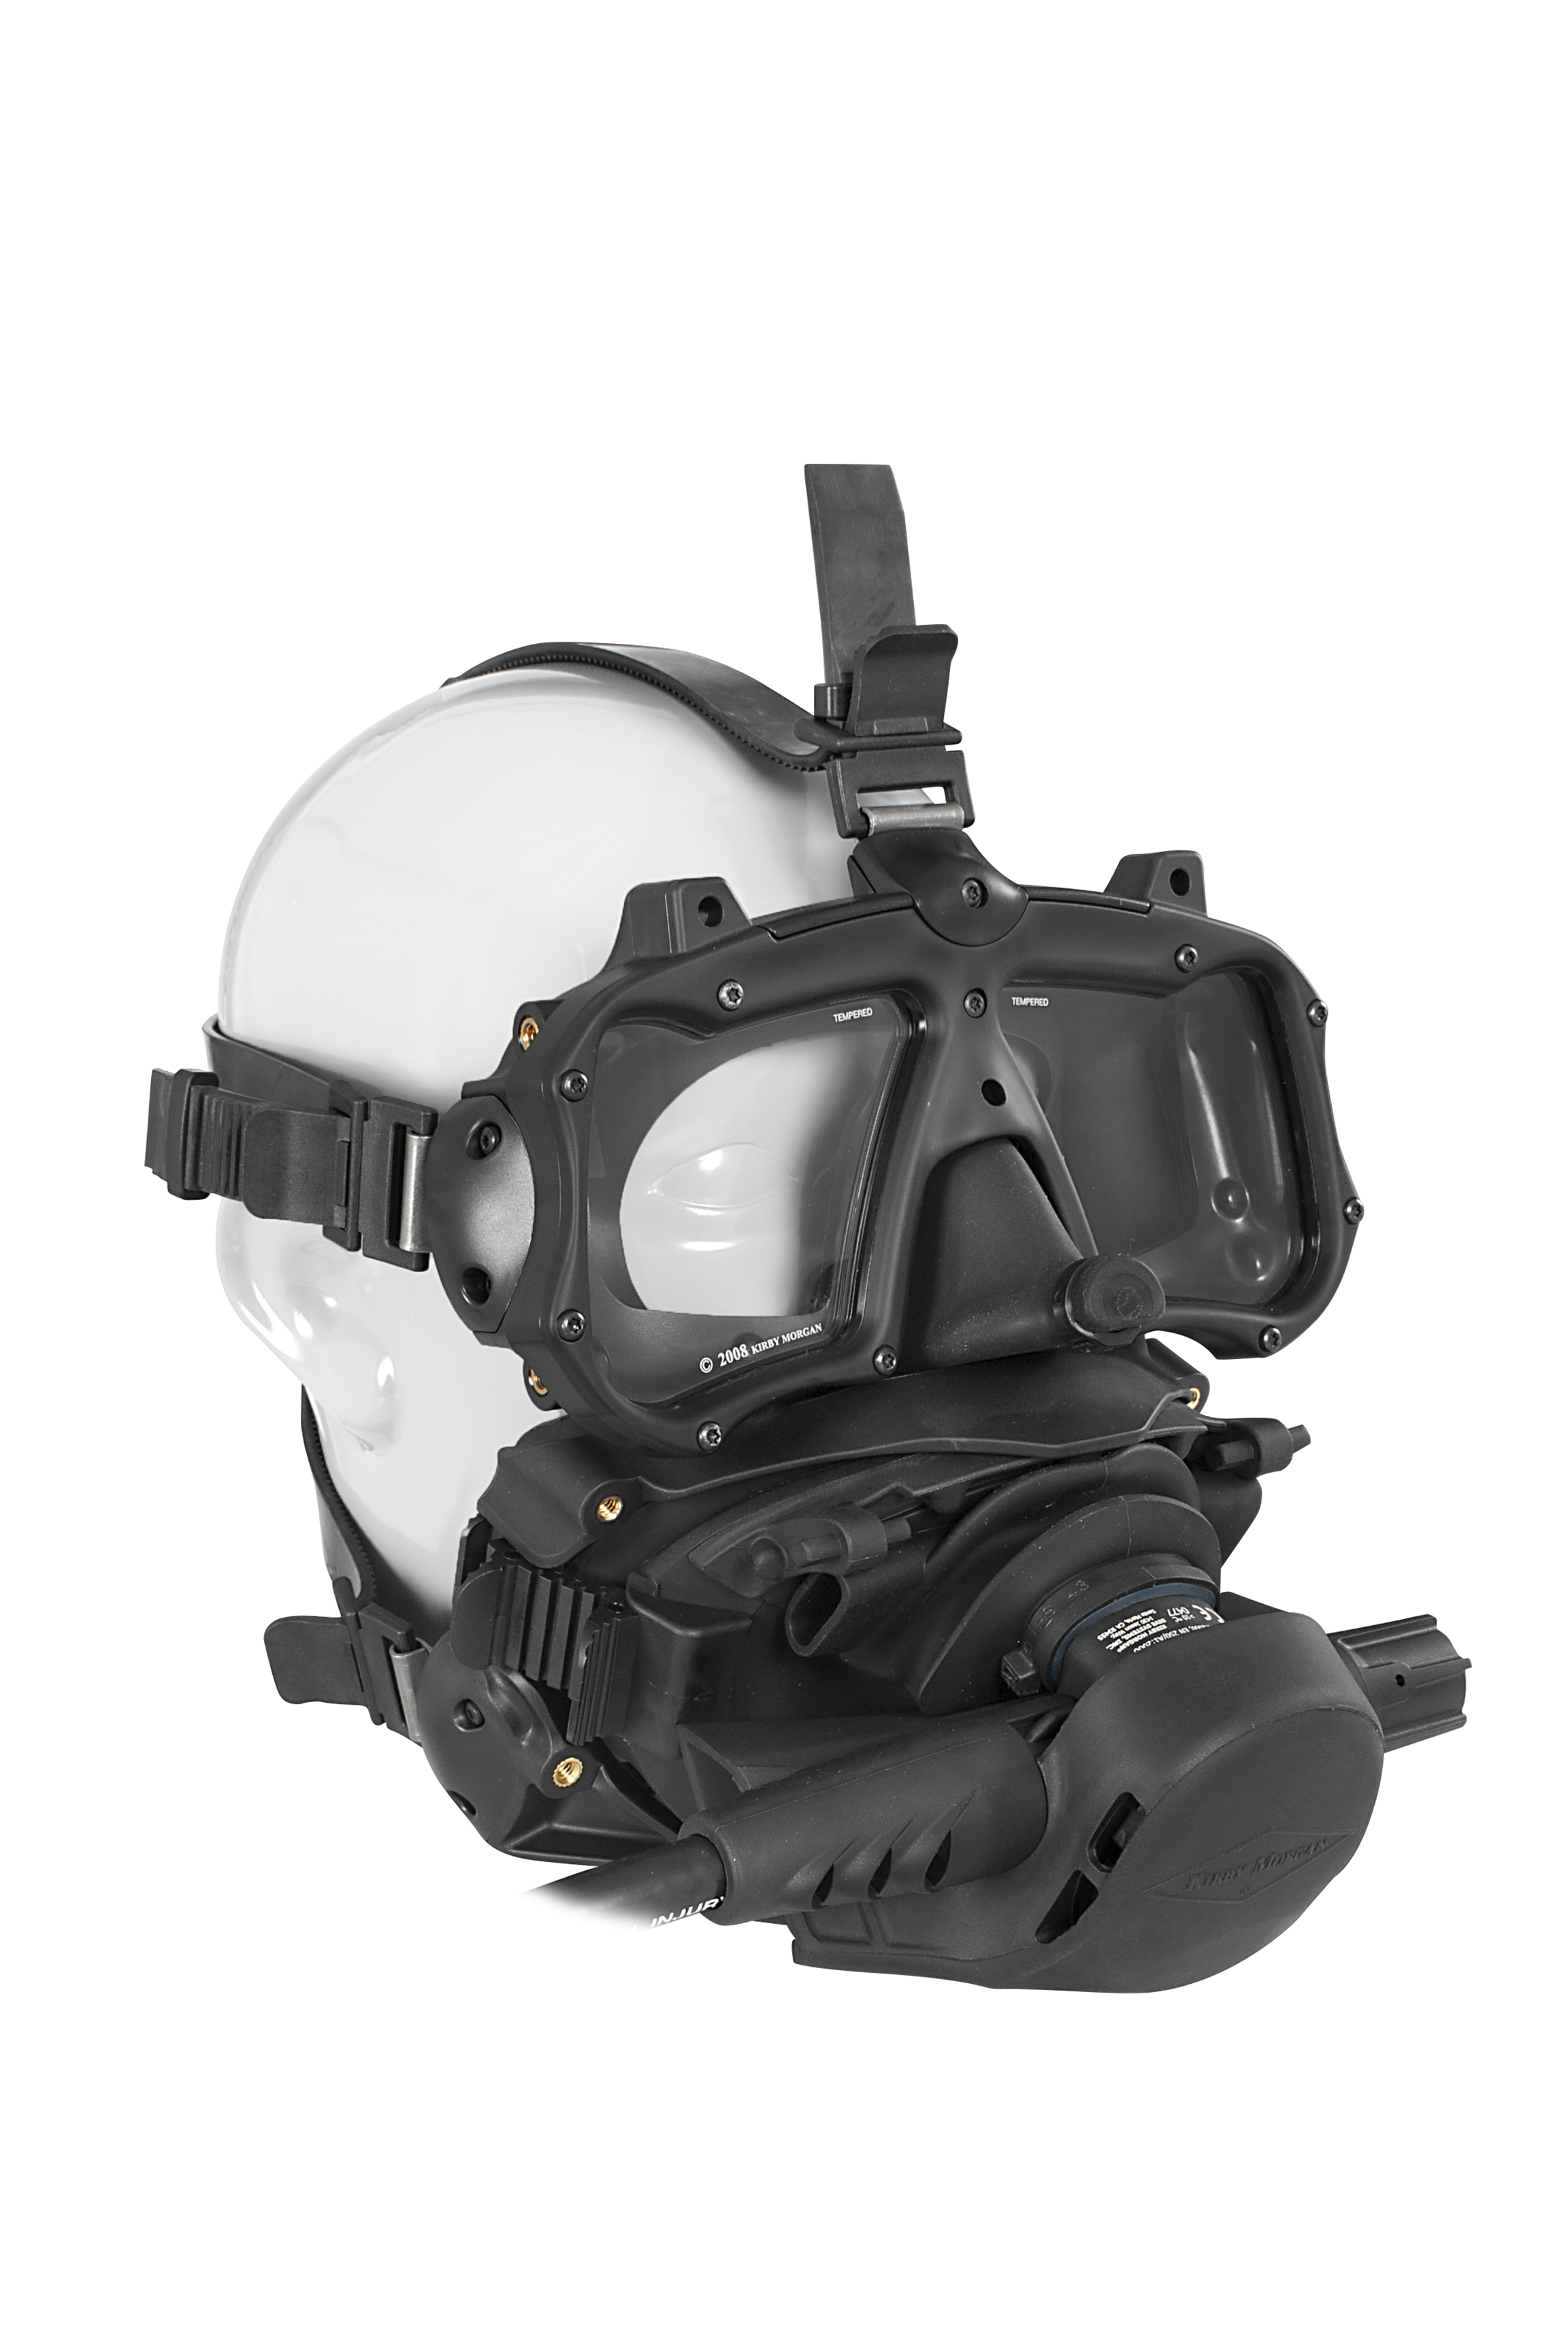 Kirby Morgan Dive Systems - Kirby Morgan® Surface Supplied MOD-1 The  Surface Supplied MOD-1 is designed for the dive team requiring a  lightweight and durable commercial diving mask. An advanced MOD-1 mask